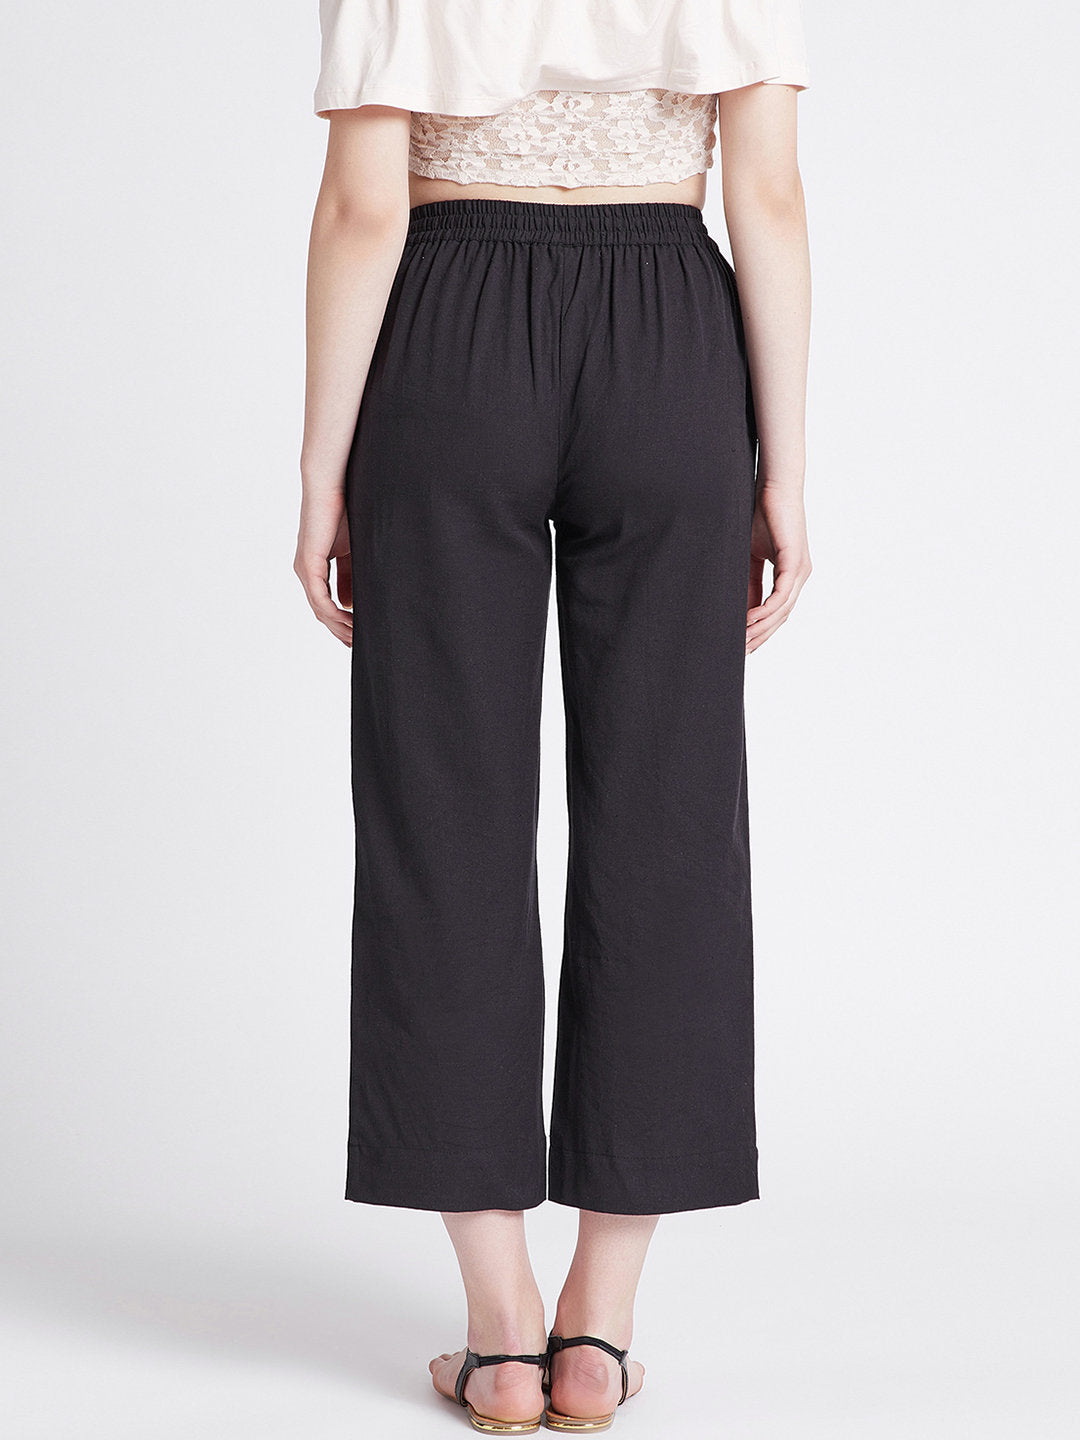 Black cotton straight pants with pockets